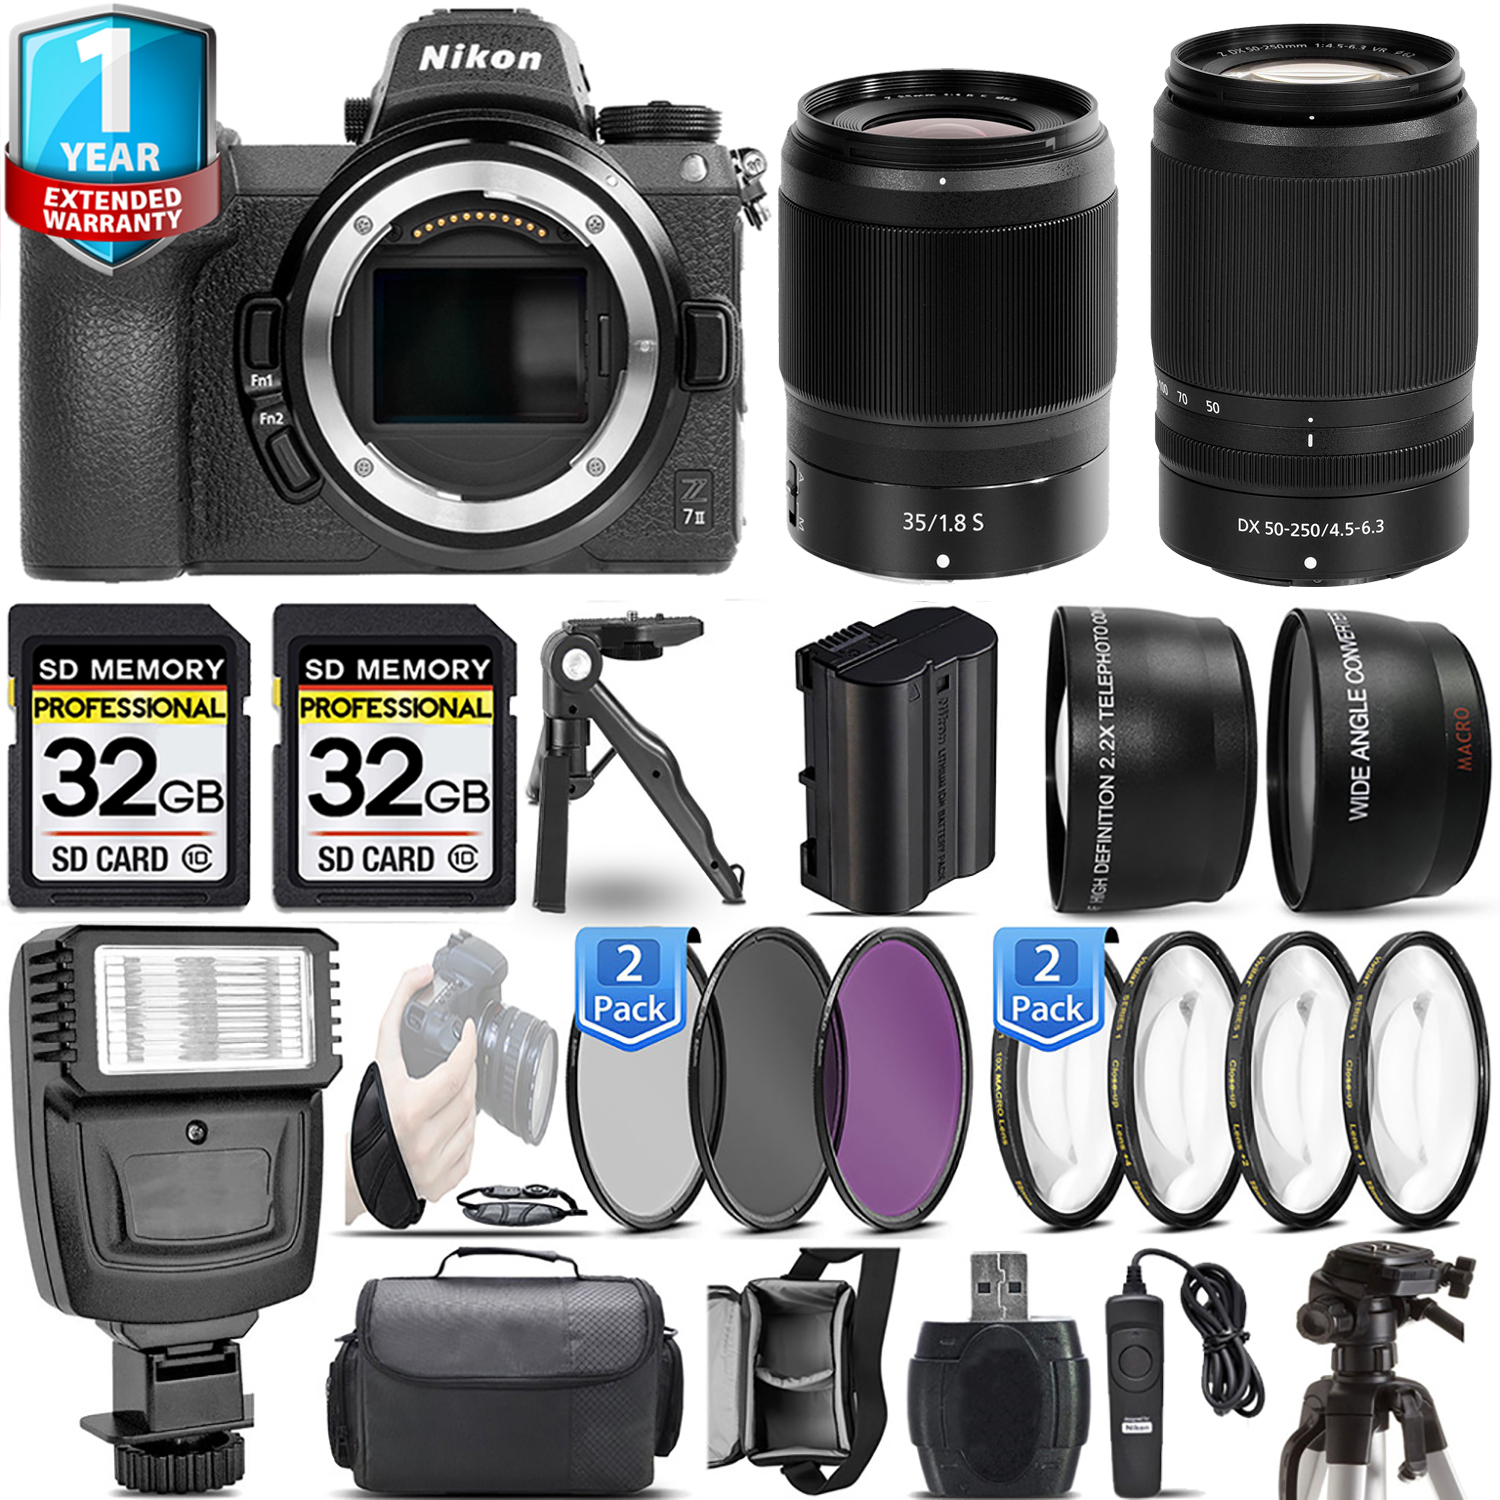 Z7 II Camera + 50-250mm + 35mm f/1.8 S Lens + 1 Year Extended Warranty + 64GB Basic Kit *FREE SHIPPING*